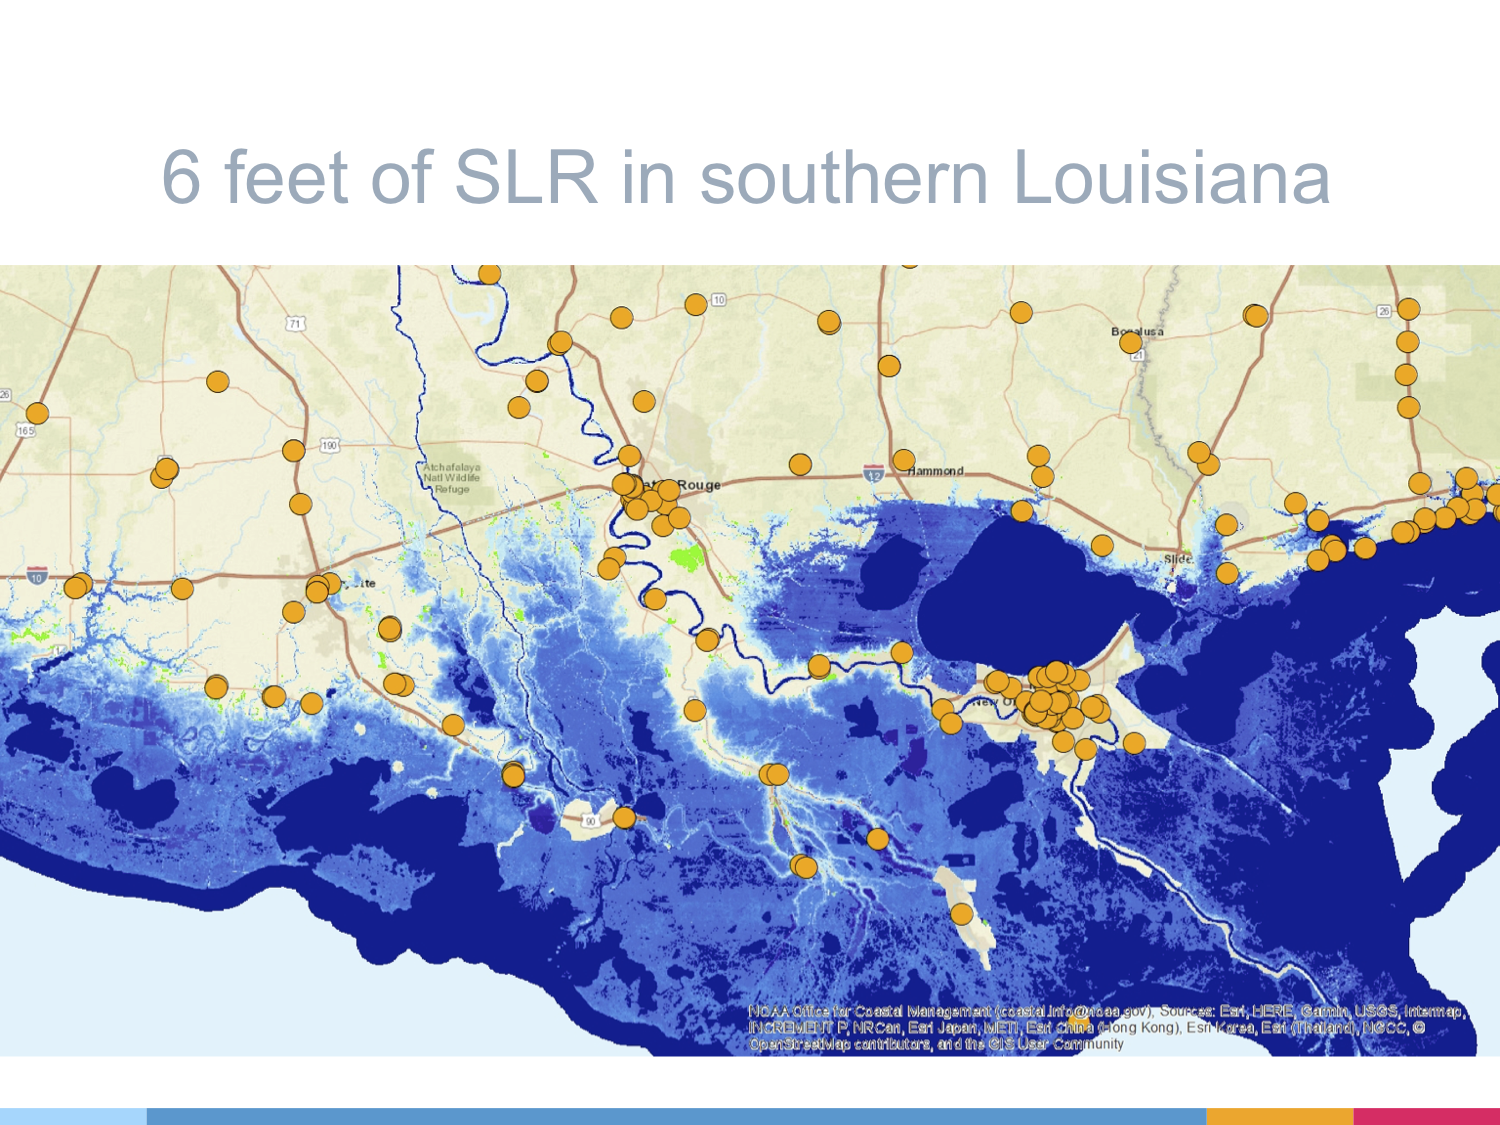 Slide from presentation made by Tansey and Goldman showing six feet of sea level rise, a possible level of change in about a century that assumes a “business as usual” nonresponse to climate change, overlain with known archive locations in Louisiana.